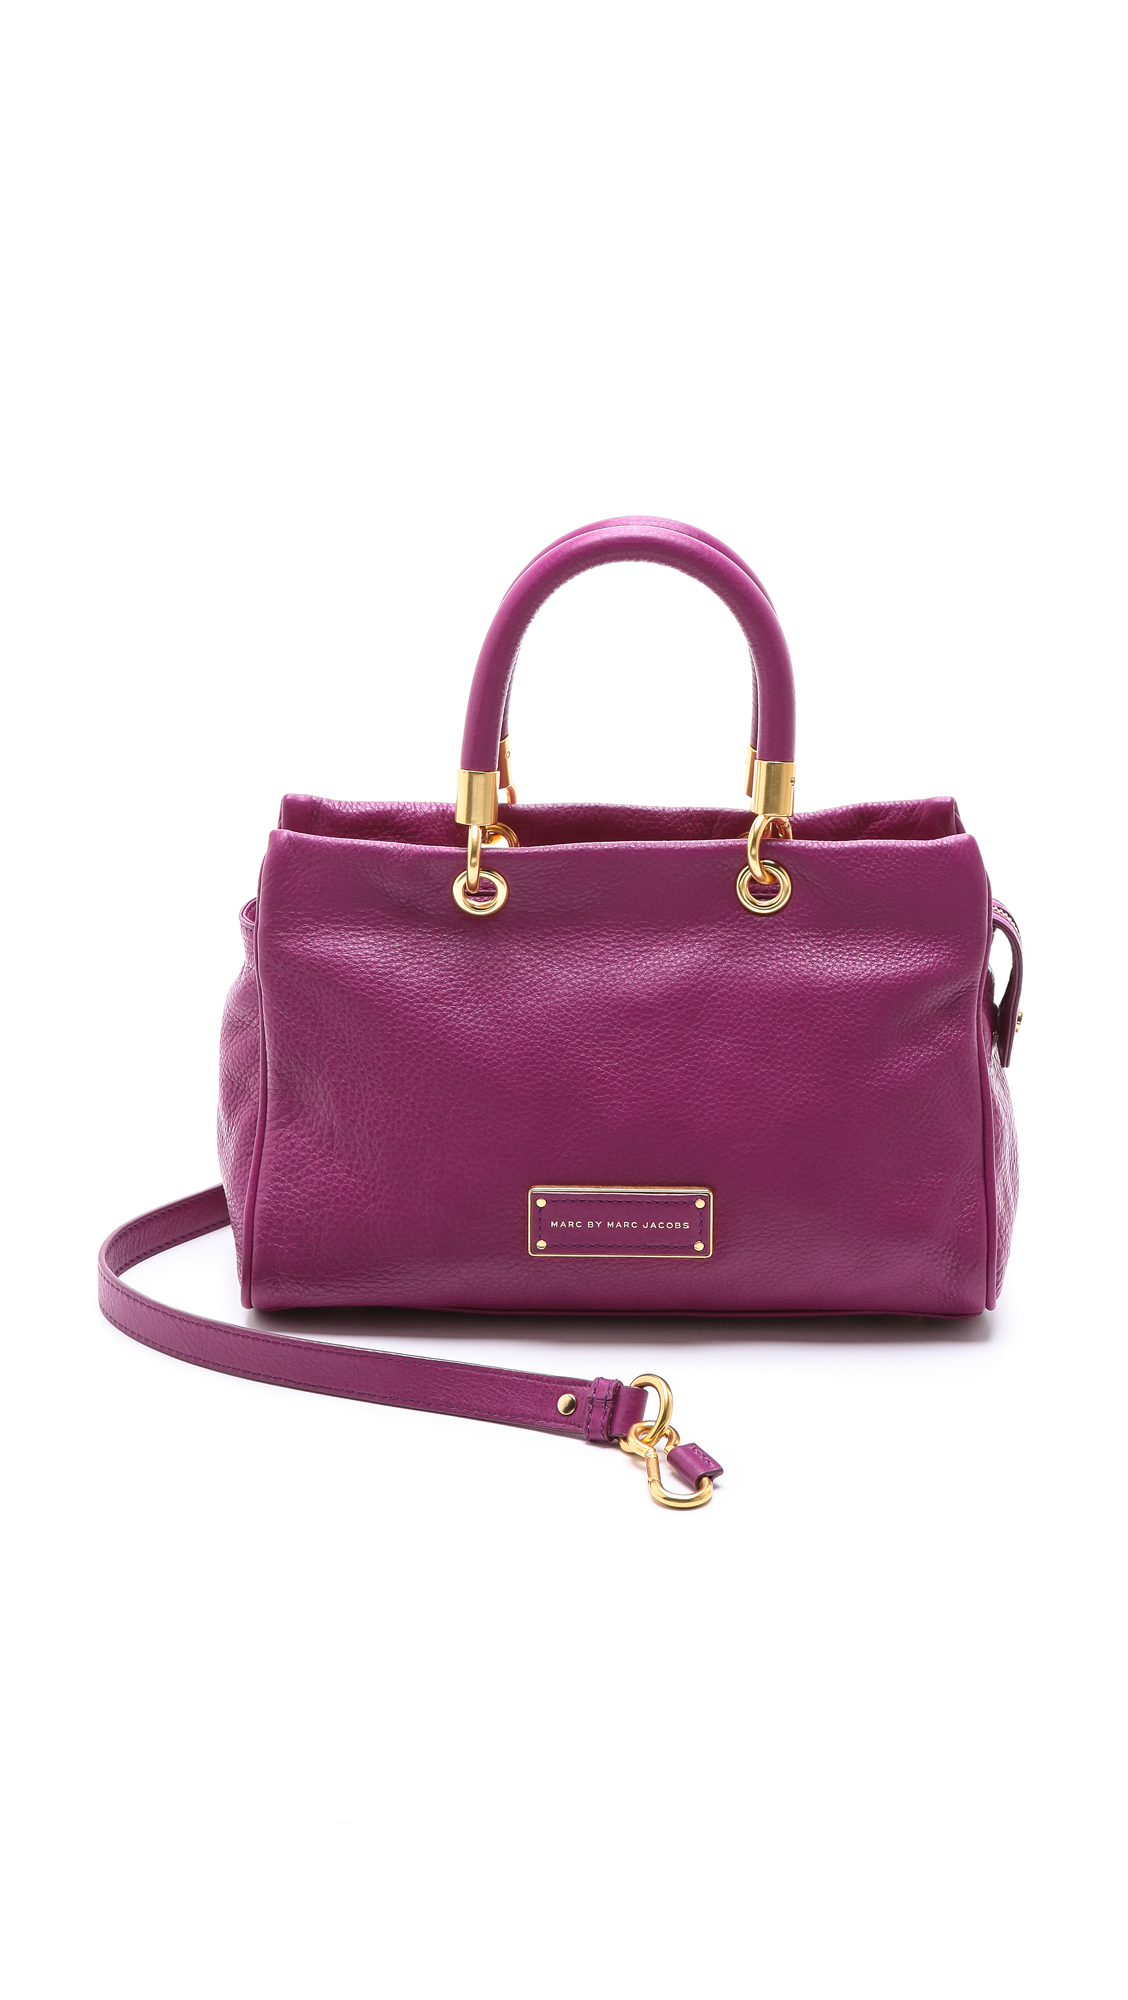 Marc By Marc Jacobs Too Hot To Handle Small Top Handle Bag in Purple - Lyst